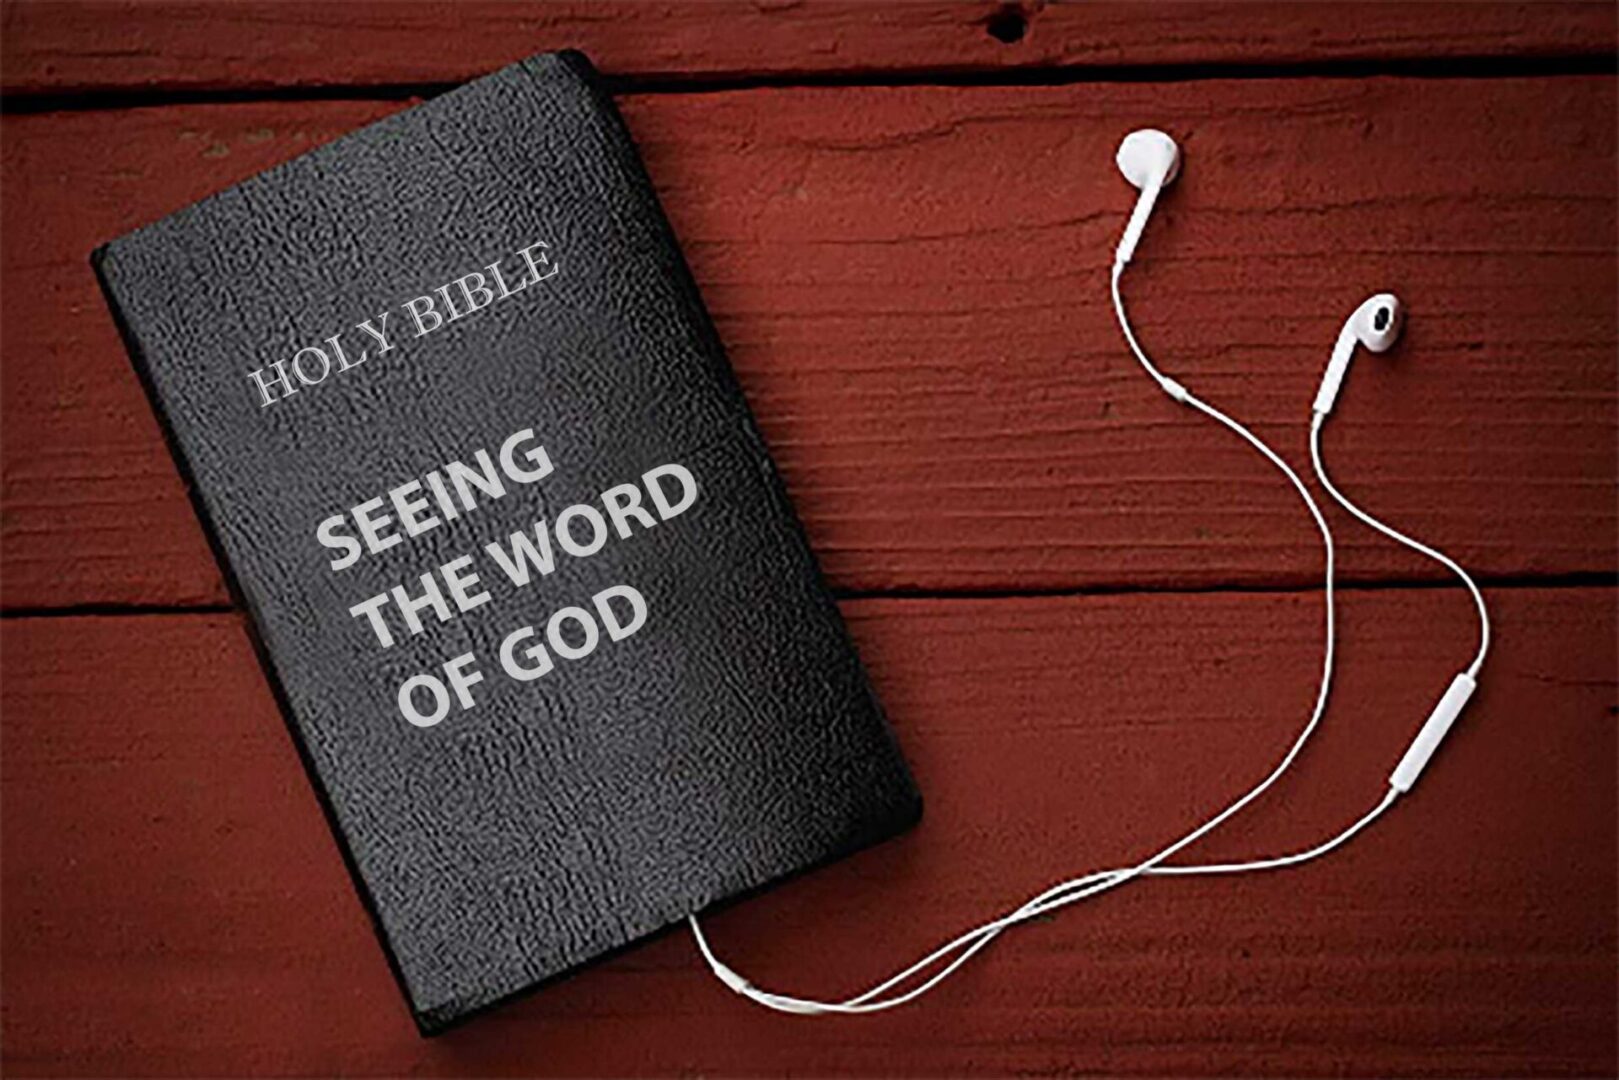 Seeing-the-Word-of-God